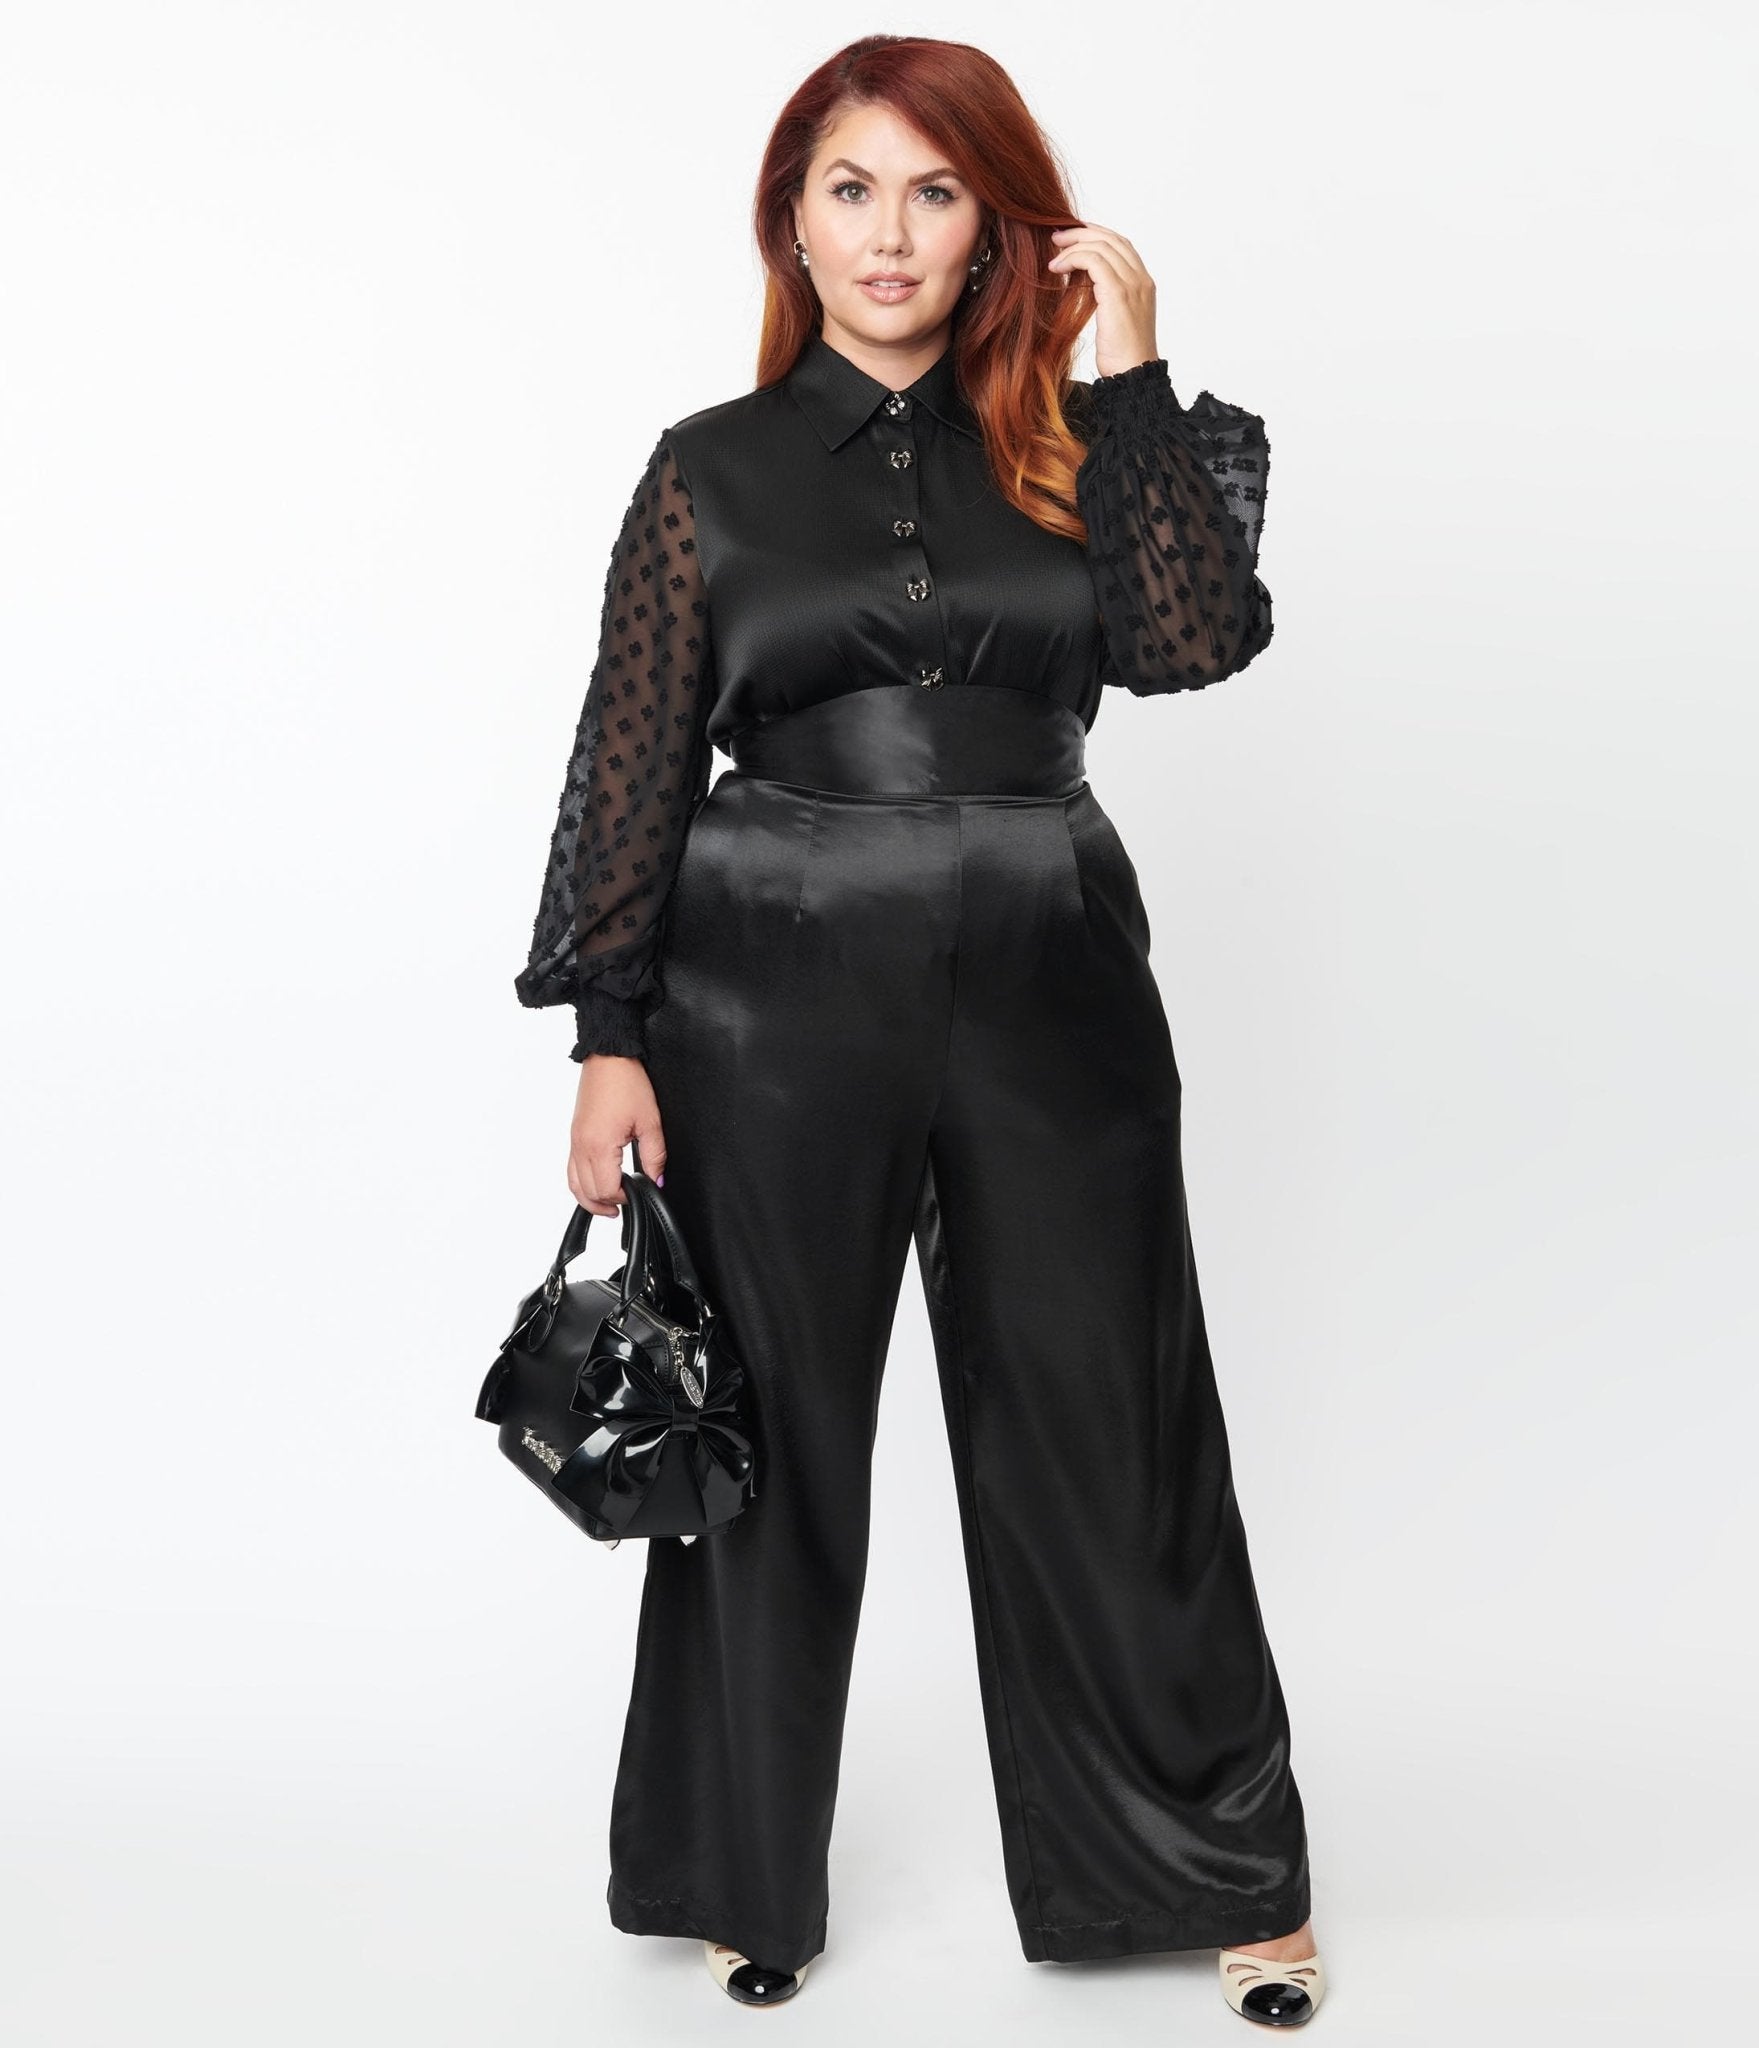 Vintage Satin High-Waisted Trousers - M